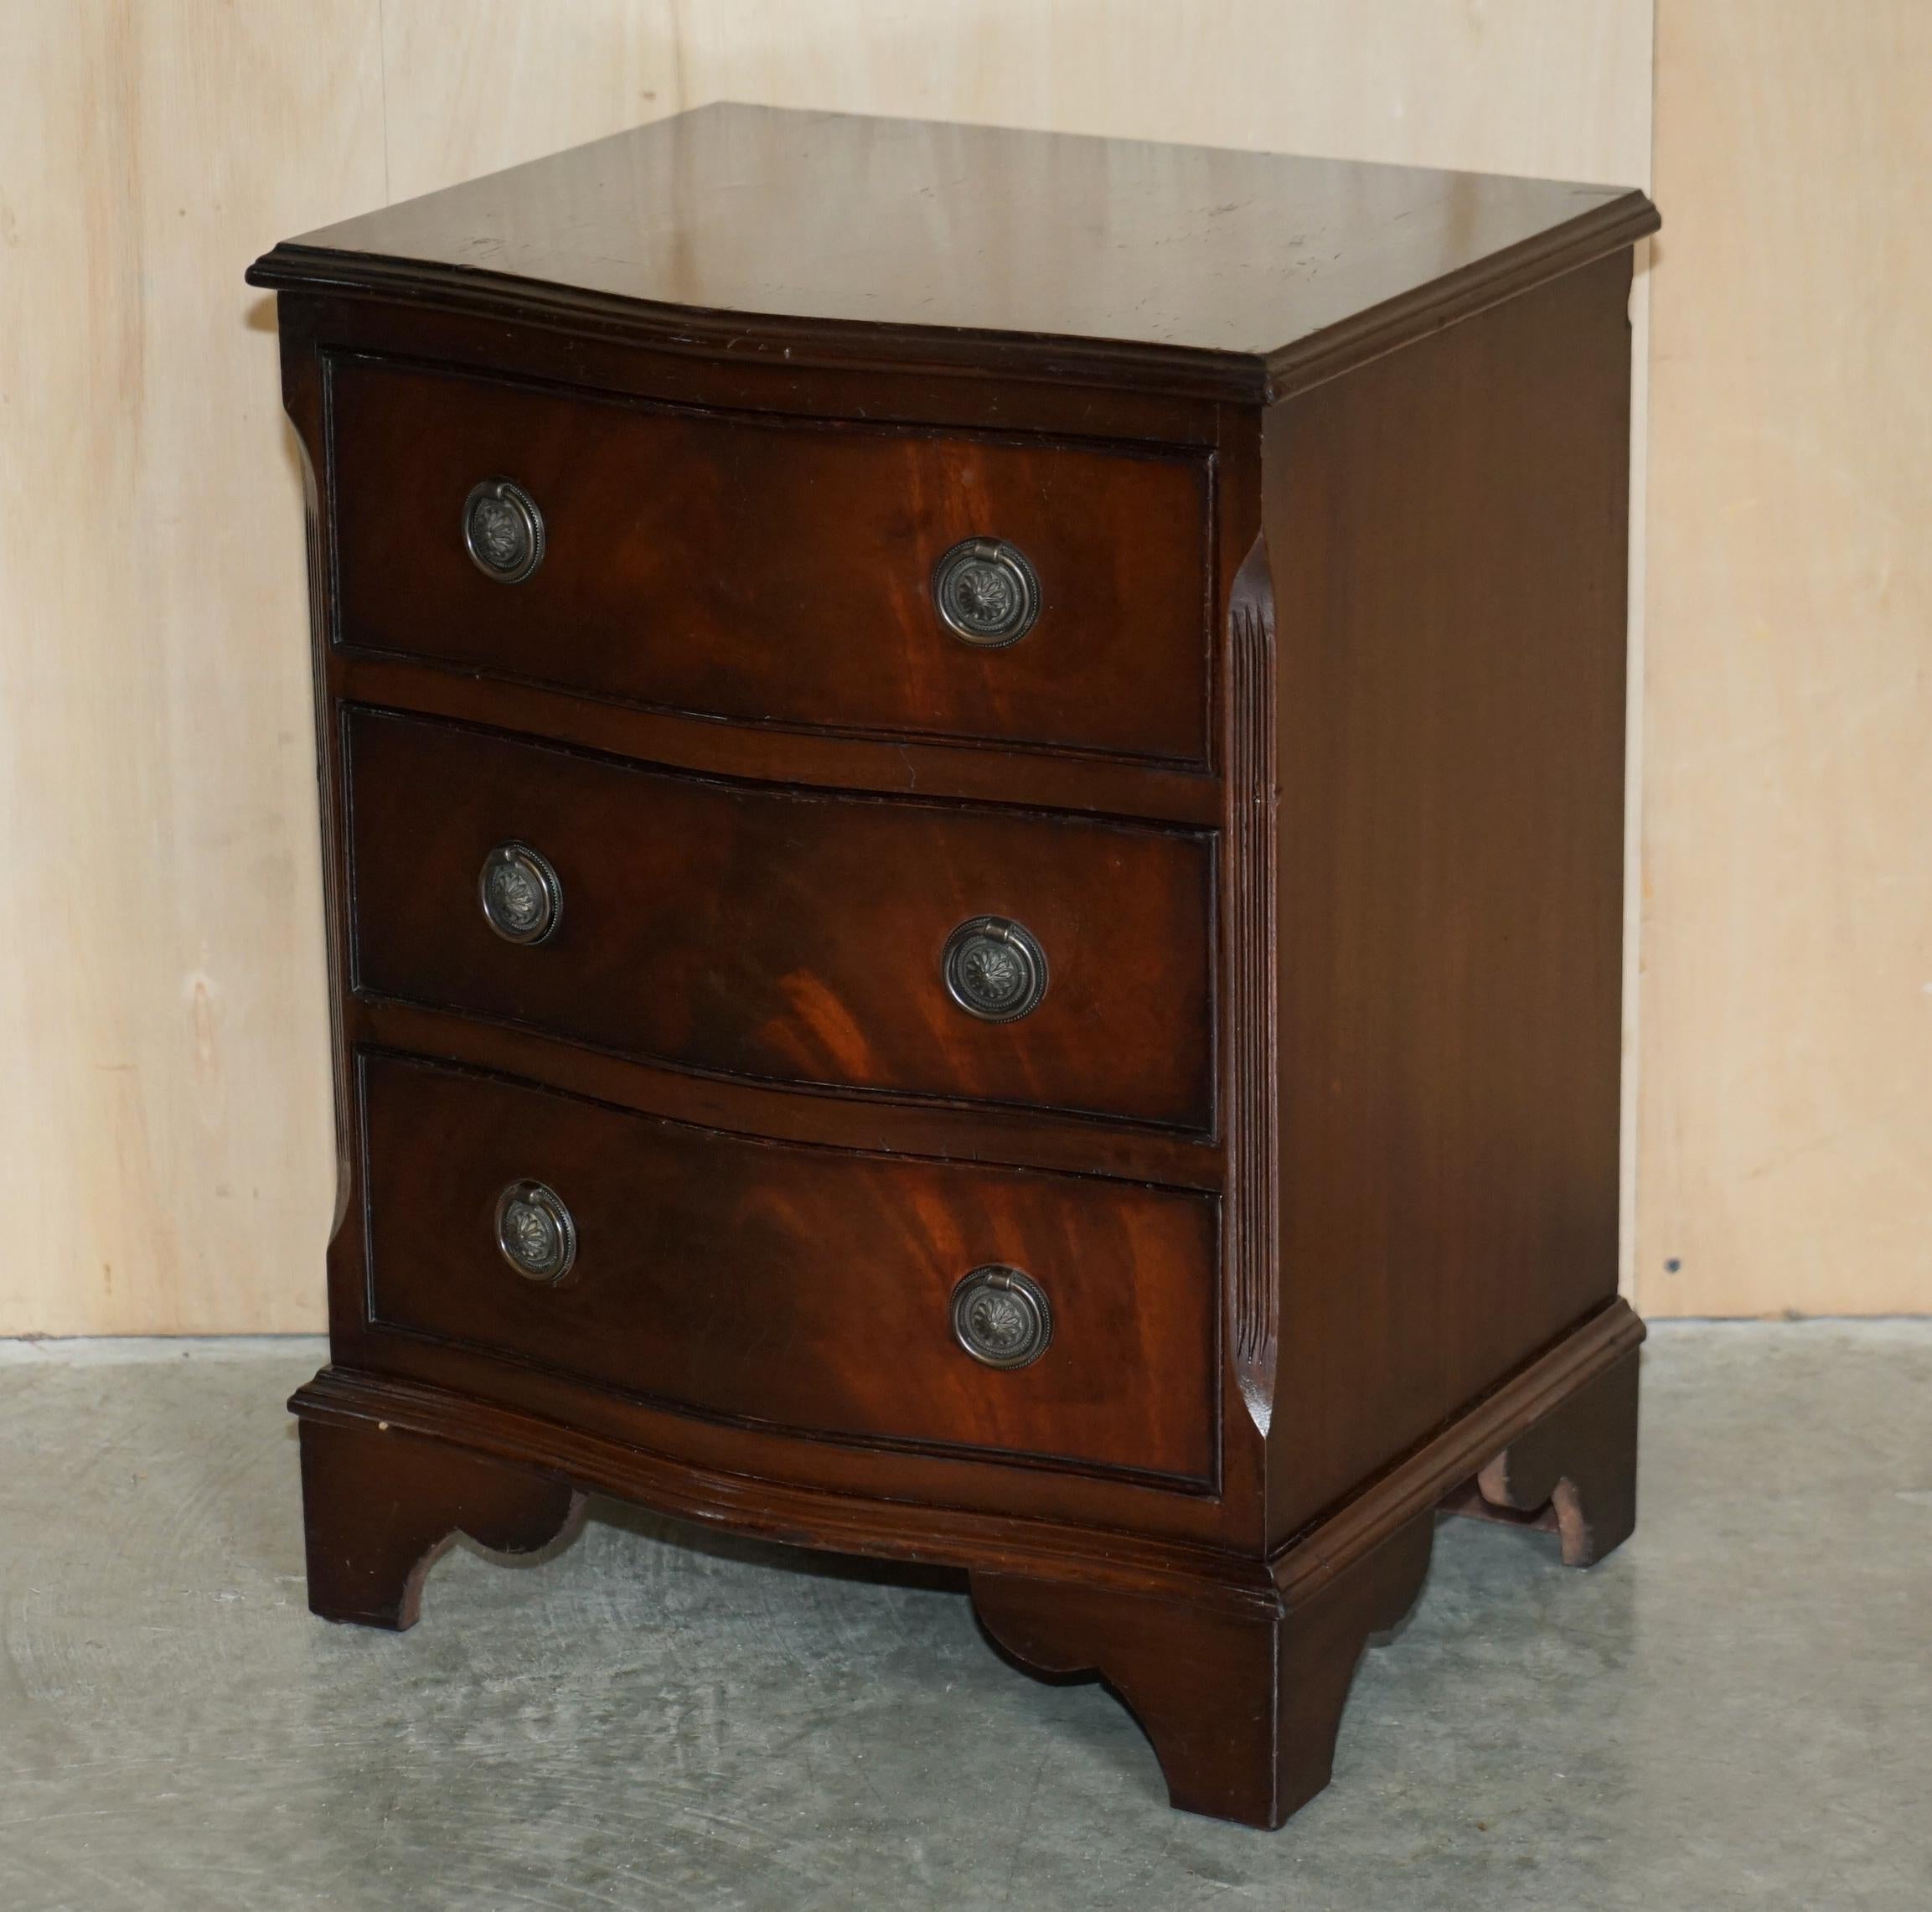 We are delighted to offer for sale this lovely pair of serpentine fronted, flamed Mahogany chest of drawers.

A good looking, decorative and well made pair. They are based on an early 18th century design, the timber patina is wonderful.

We have